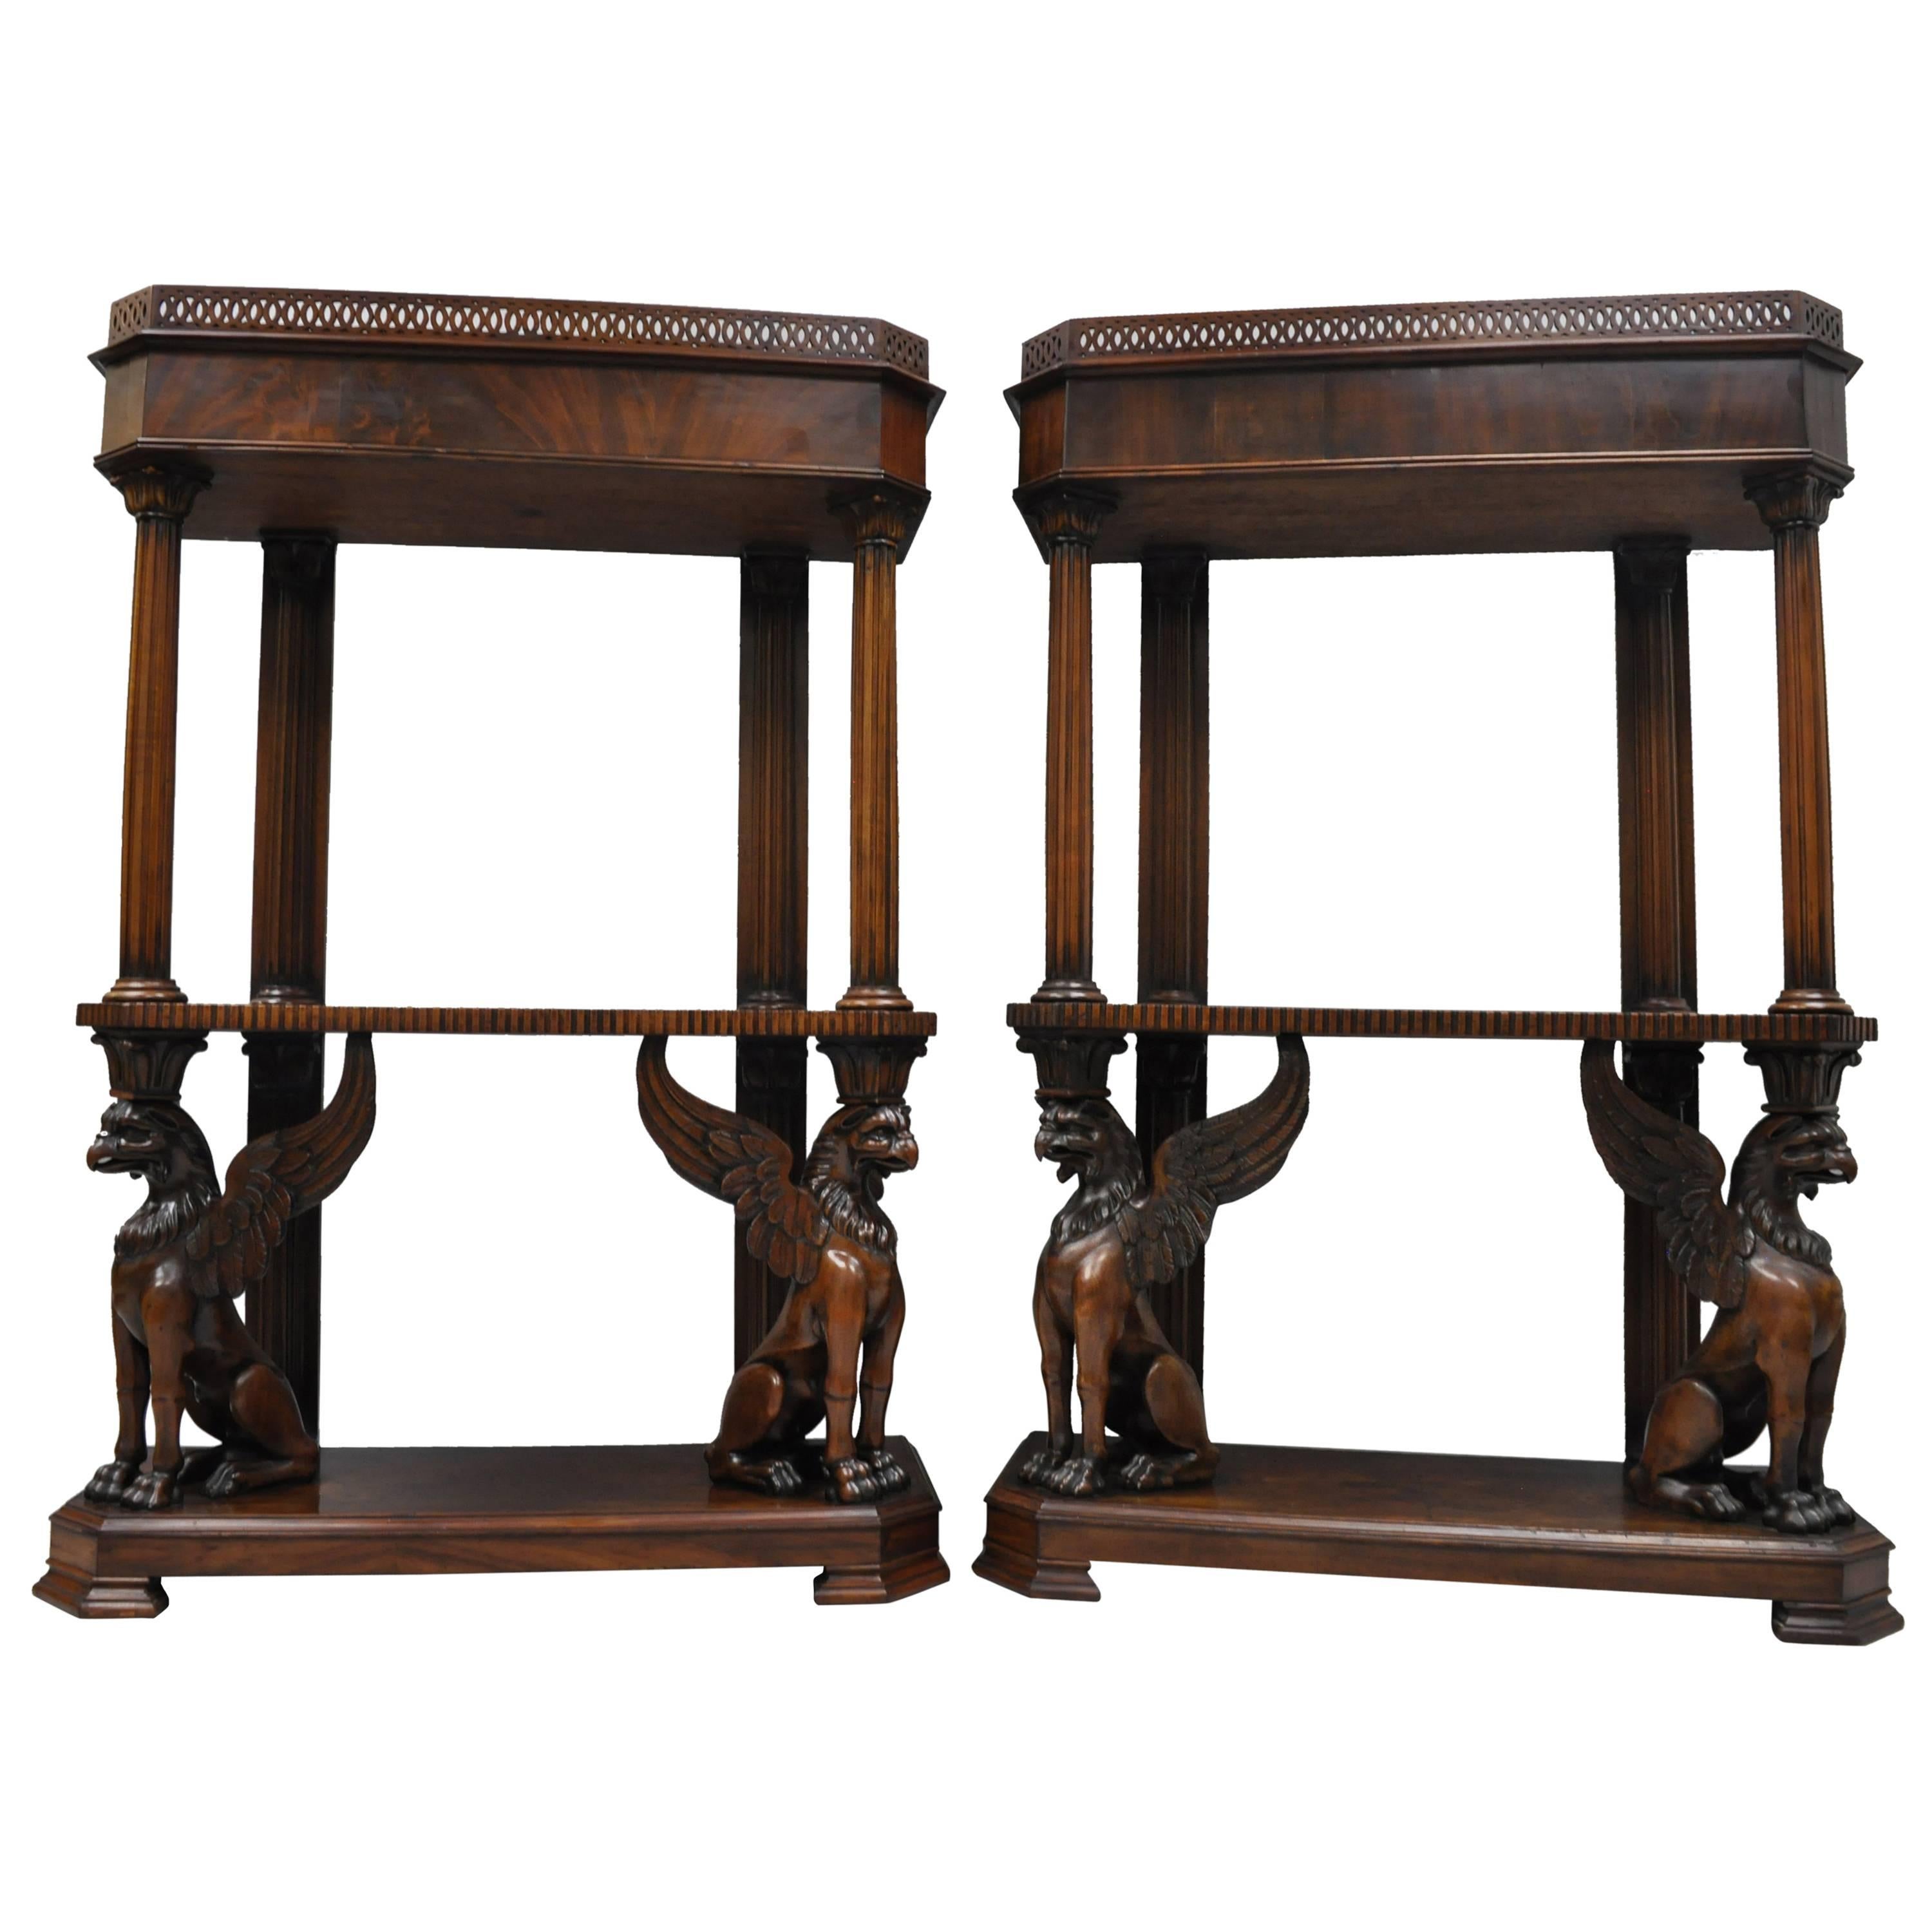 Pair of Mahogany Regency Style Carved Griffin Bookcase Curio Stands Horner Style For Sale